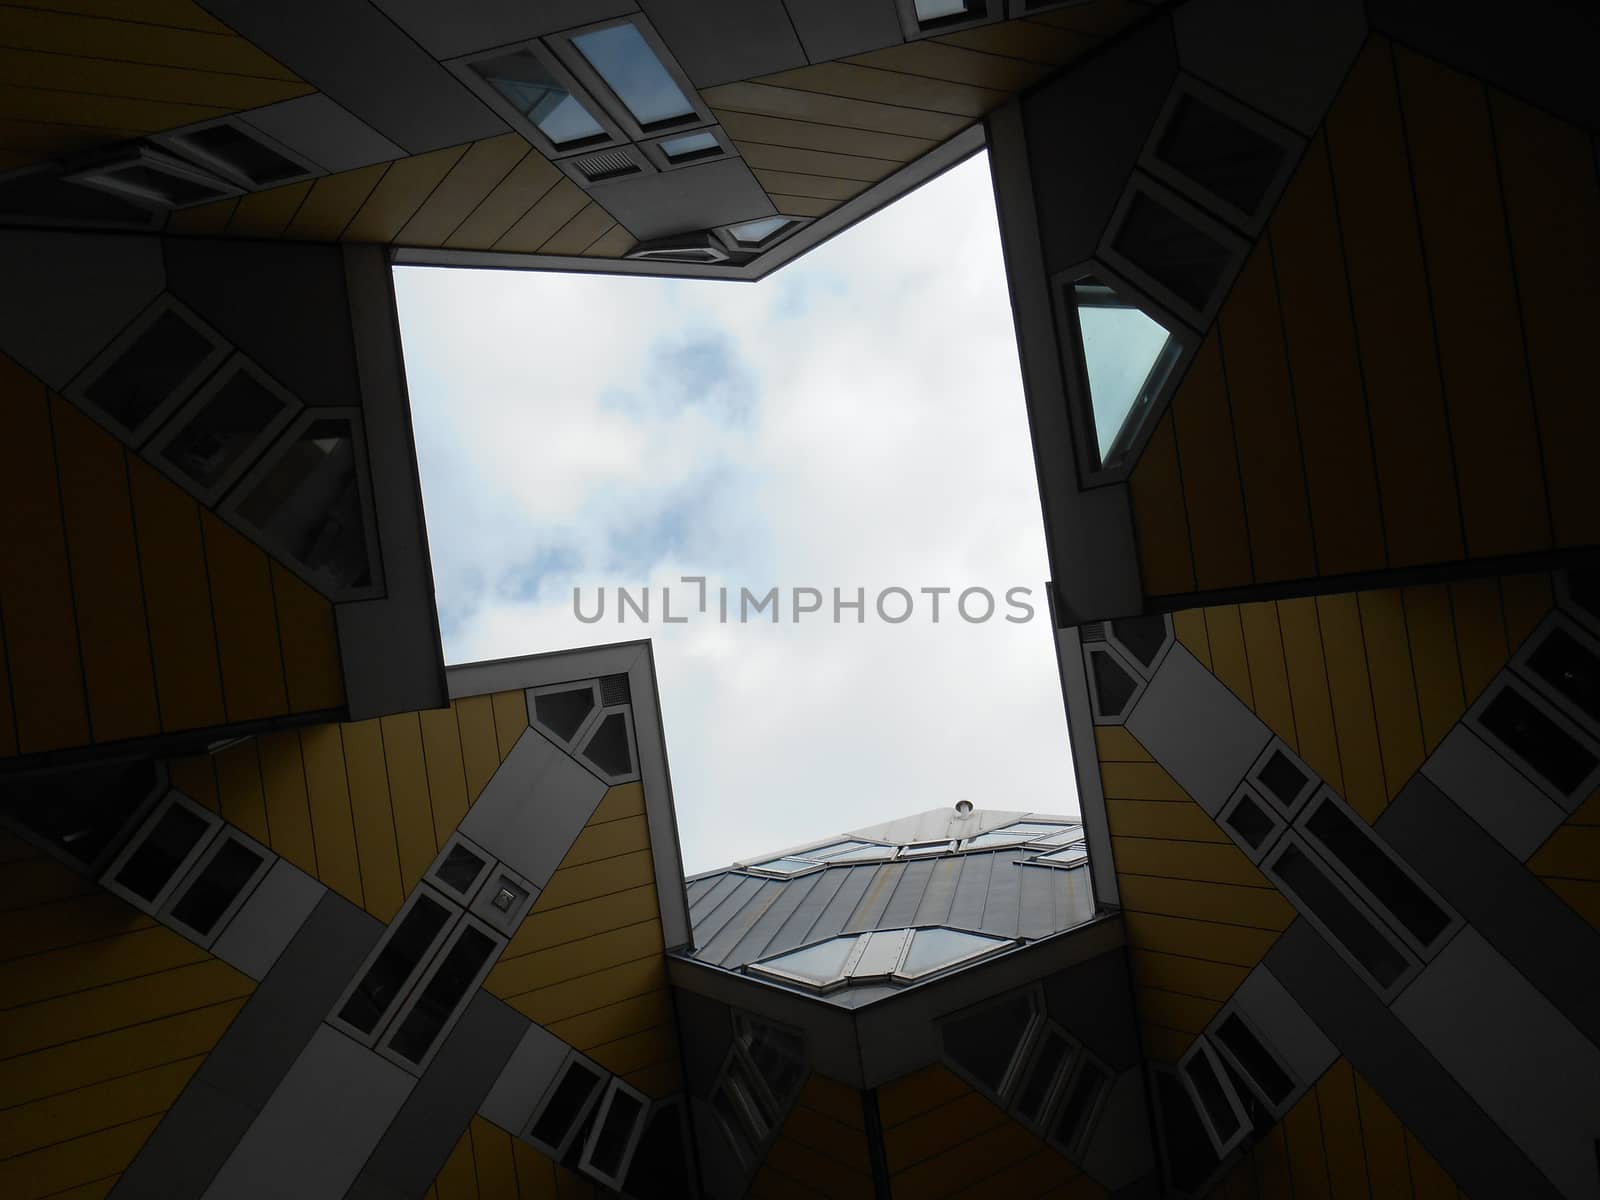 A view of the sky as can be seen between the Cubic houses, Rotterdam The Netherlands.

Picture taken on August 17, 2013.